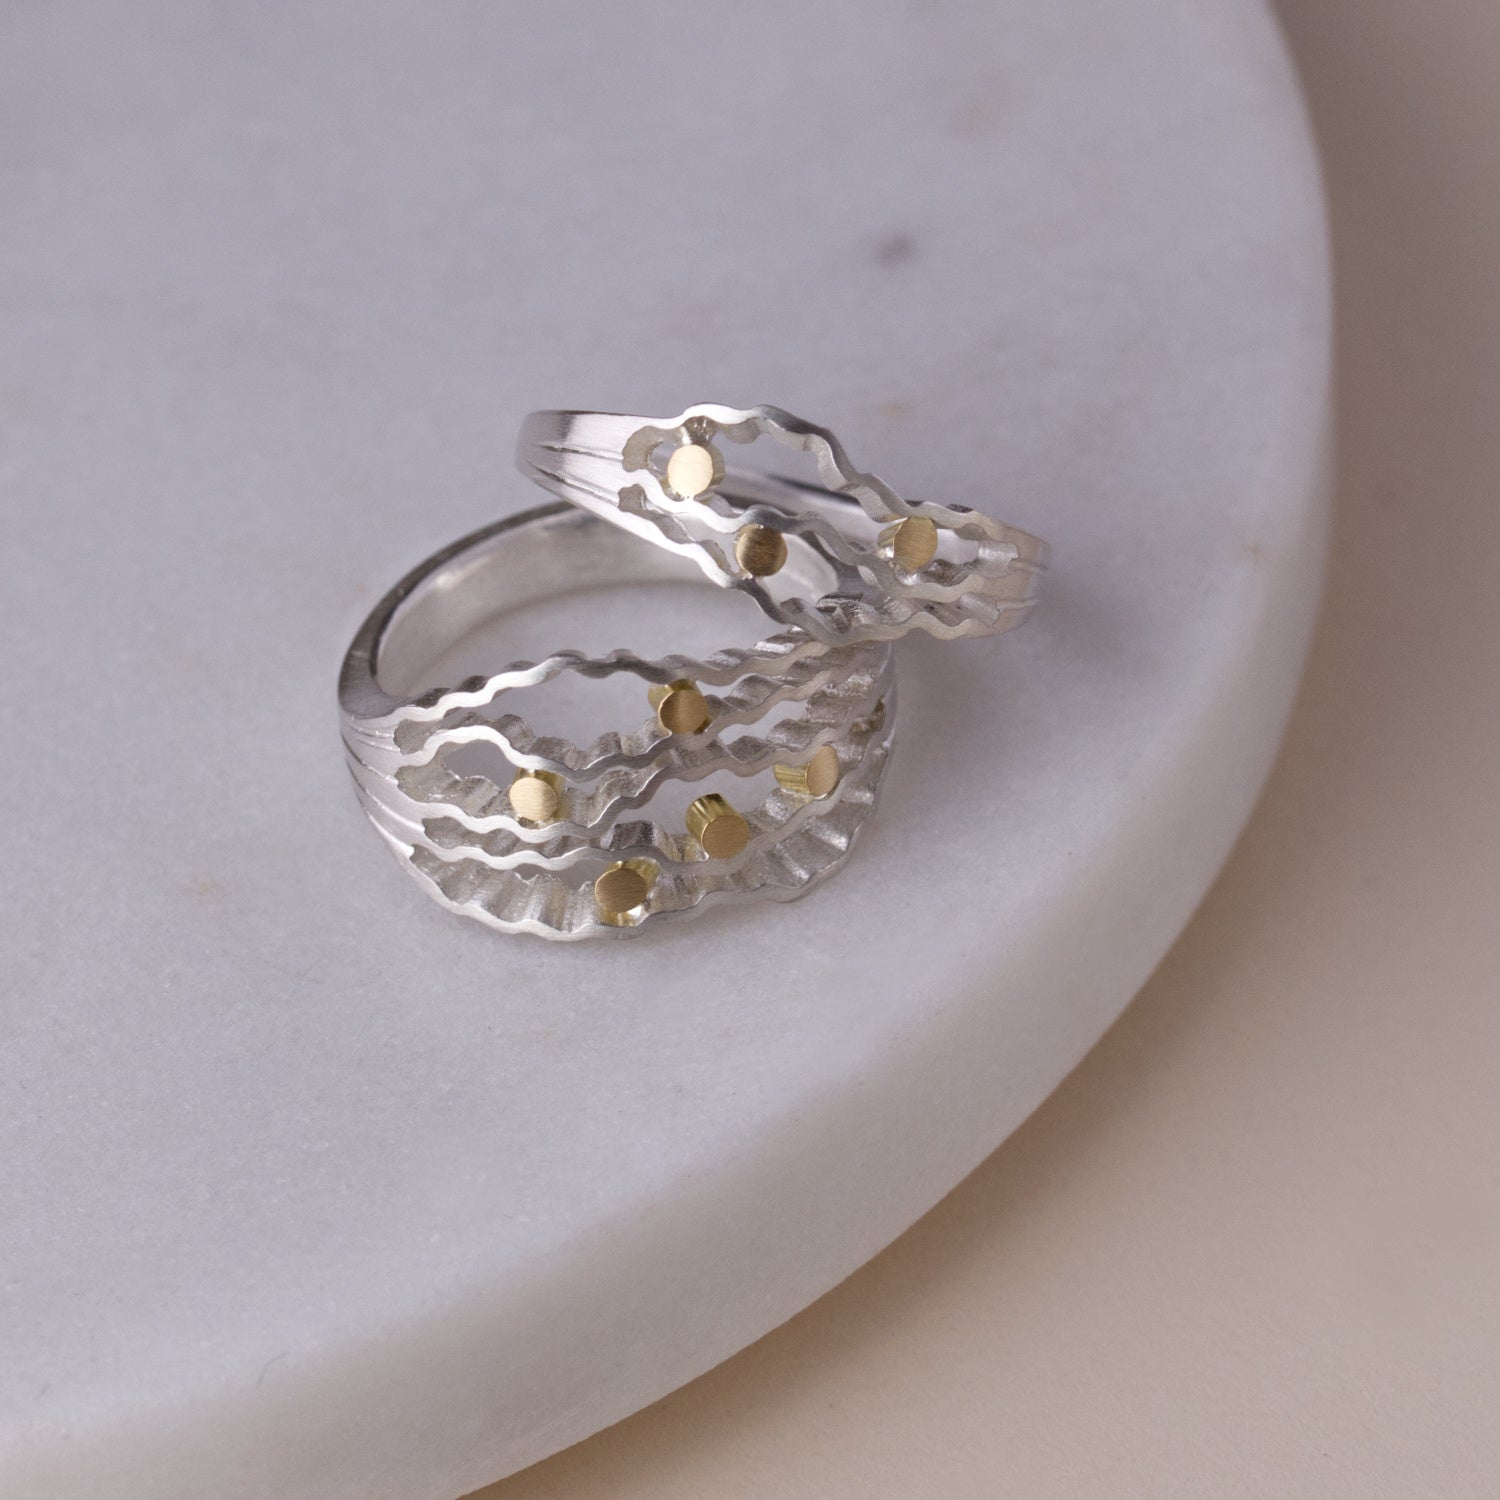 NEW - Statement Strata Ring - Silver and Gold